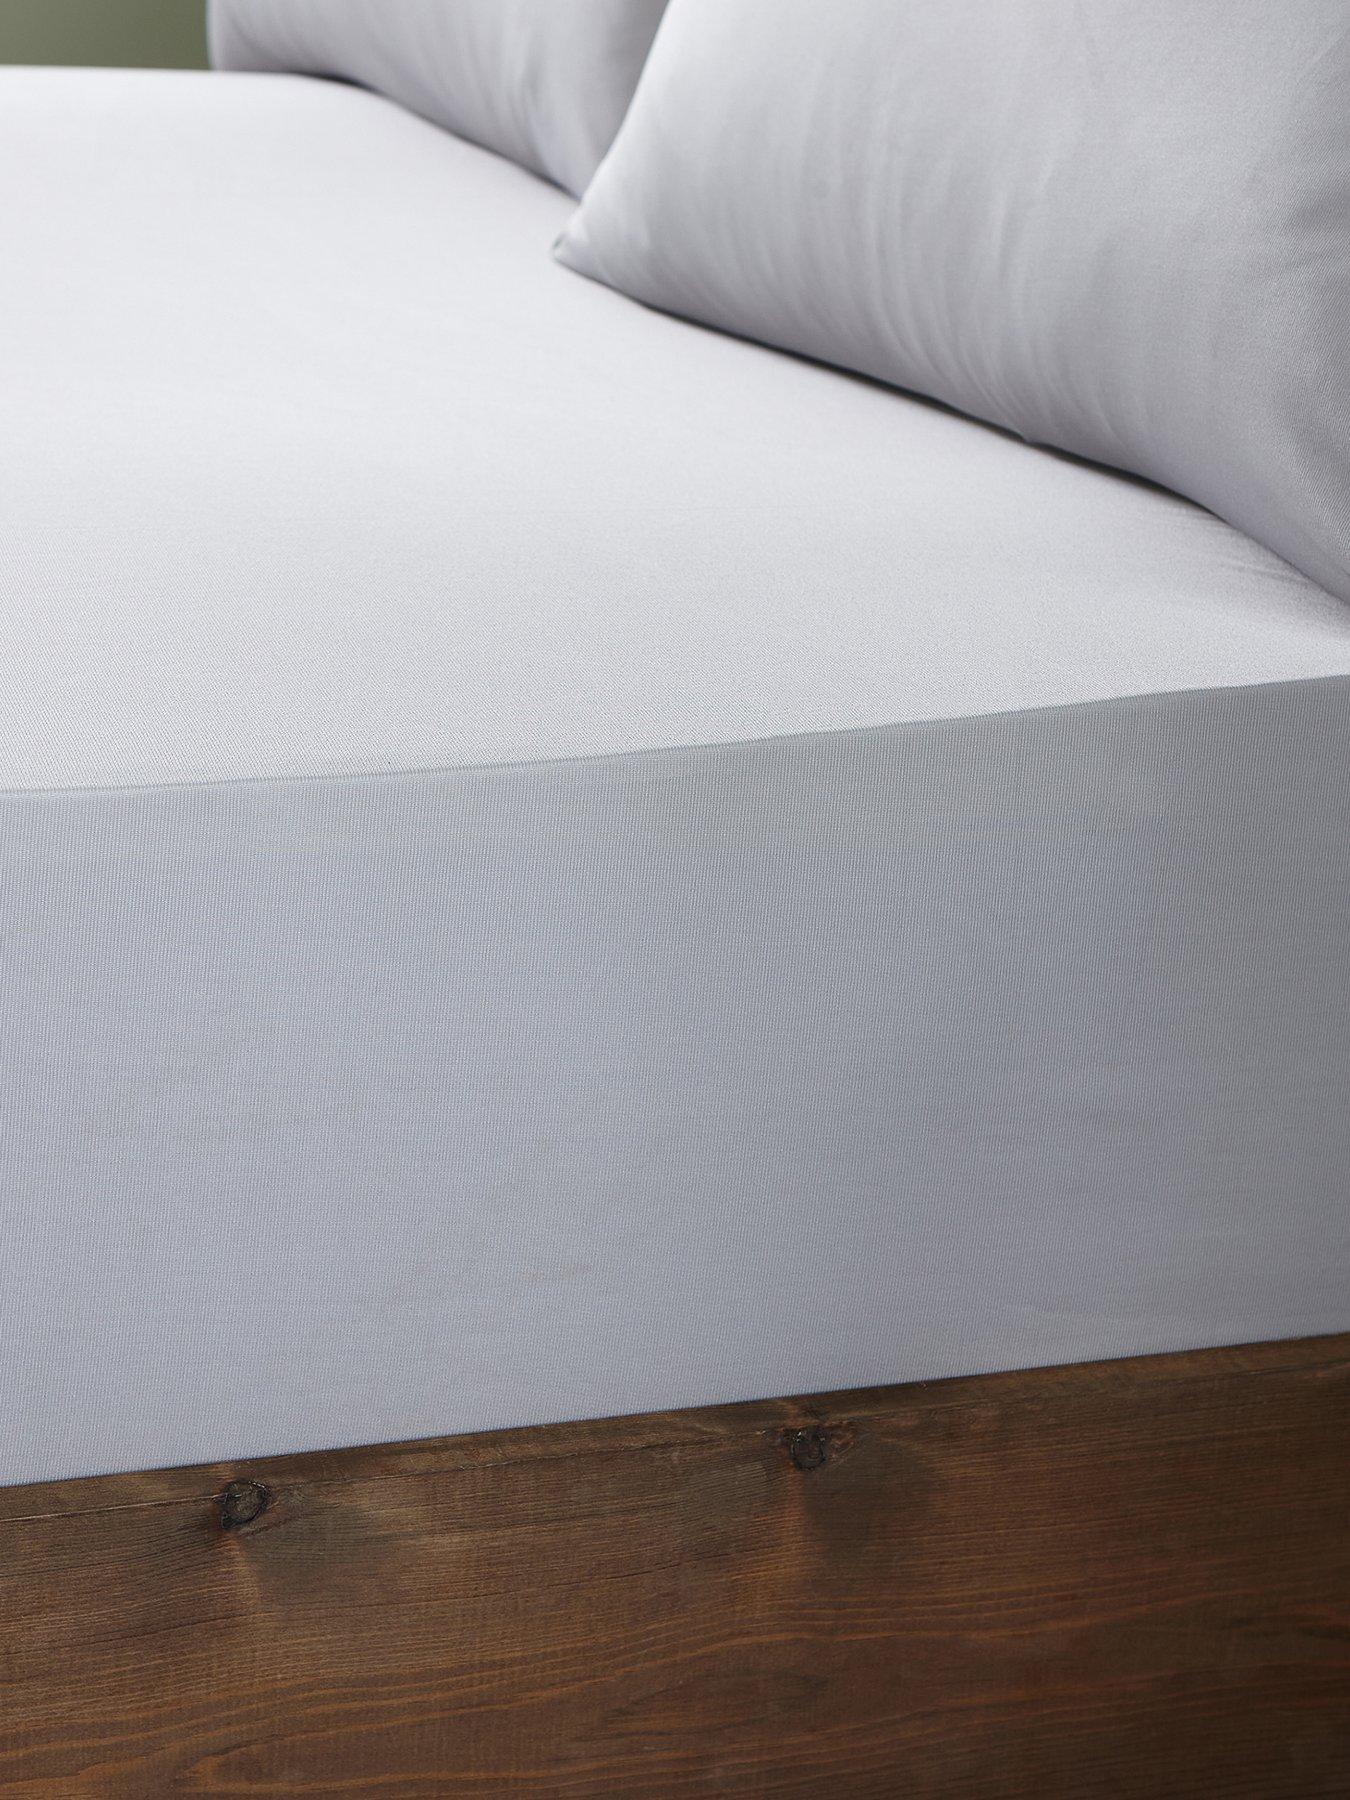 Fitted Sheet 90 100 x 200 Fitted Sheet Bed Sheets Jersey 100% Cotton 24 FB 